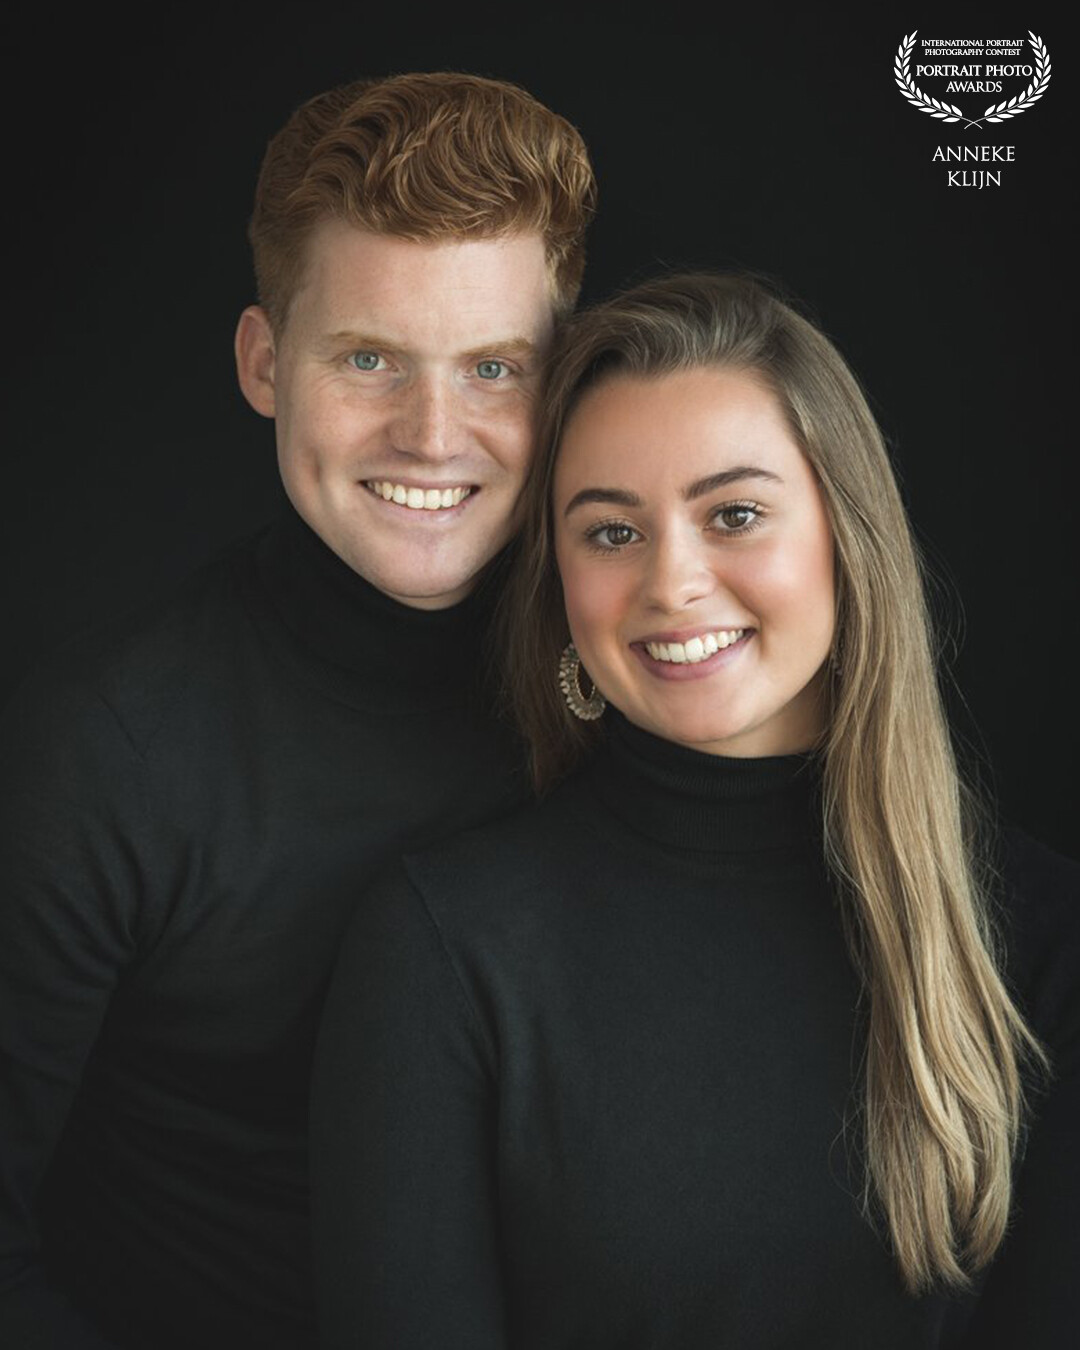 This is one of my favorite photos from the shoot with my amazing models Klaas-Jan and Anne. This couple with their wonderful eyes, smile and hair color: beautiful! <br />
<br />
Model: Klaas-Jan and Anne<br />
Created and edit by: @anneke_klijn_fotografie<br />
www.annekeklijnfotografie.nl